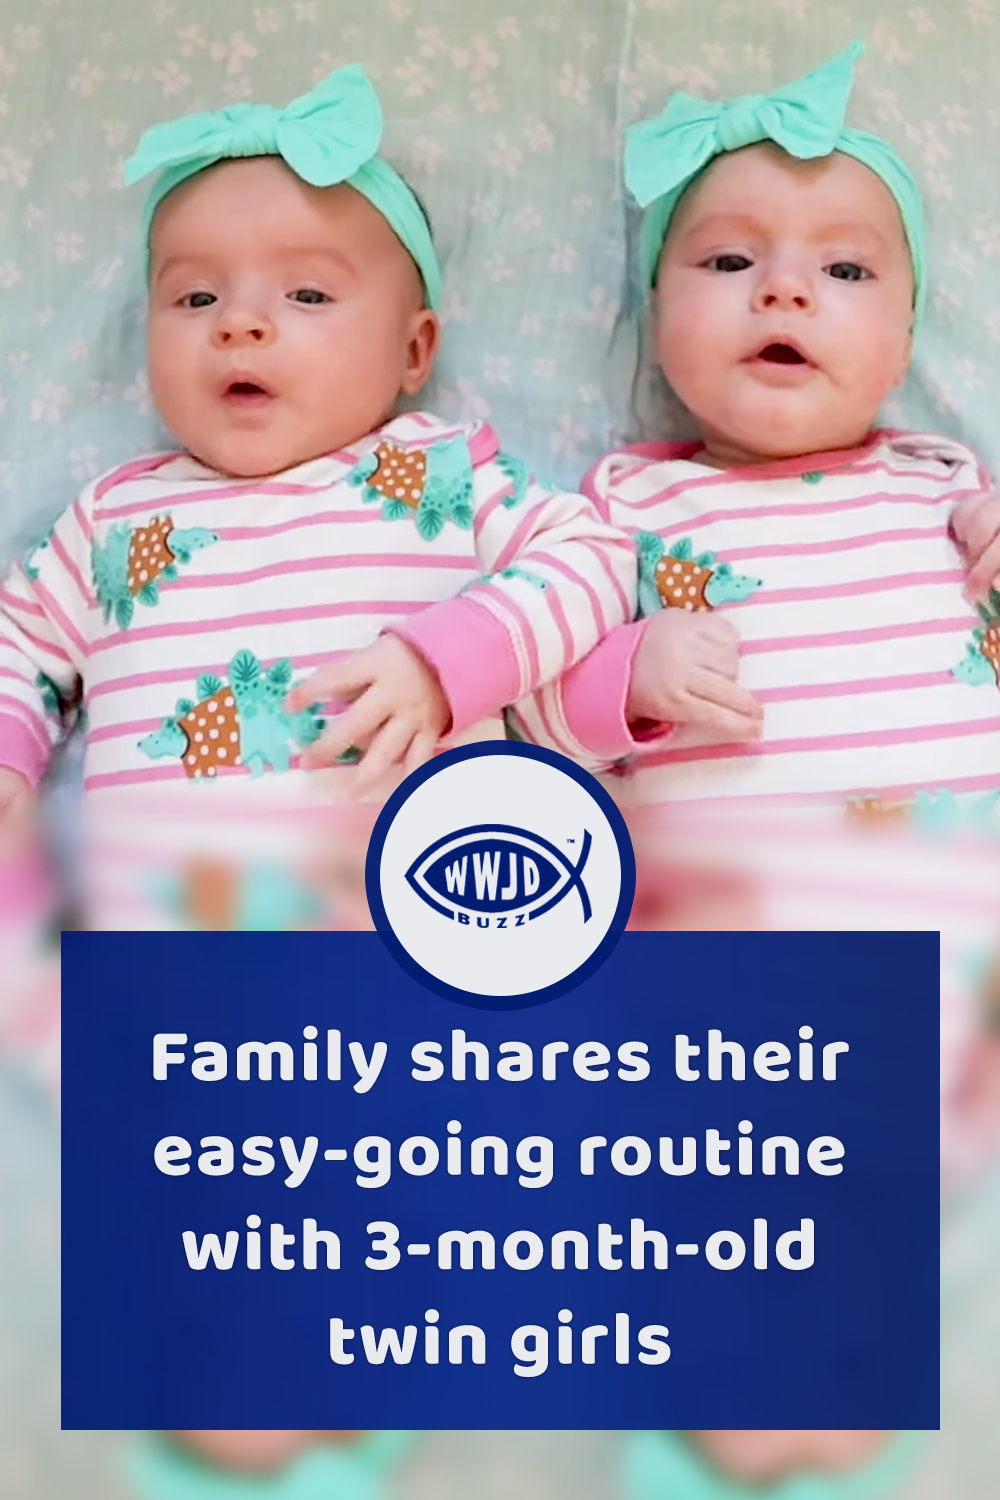 Family shares their easy-going routine with 3-month-old twin girls